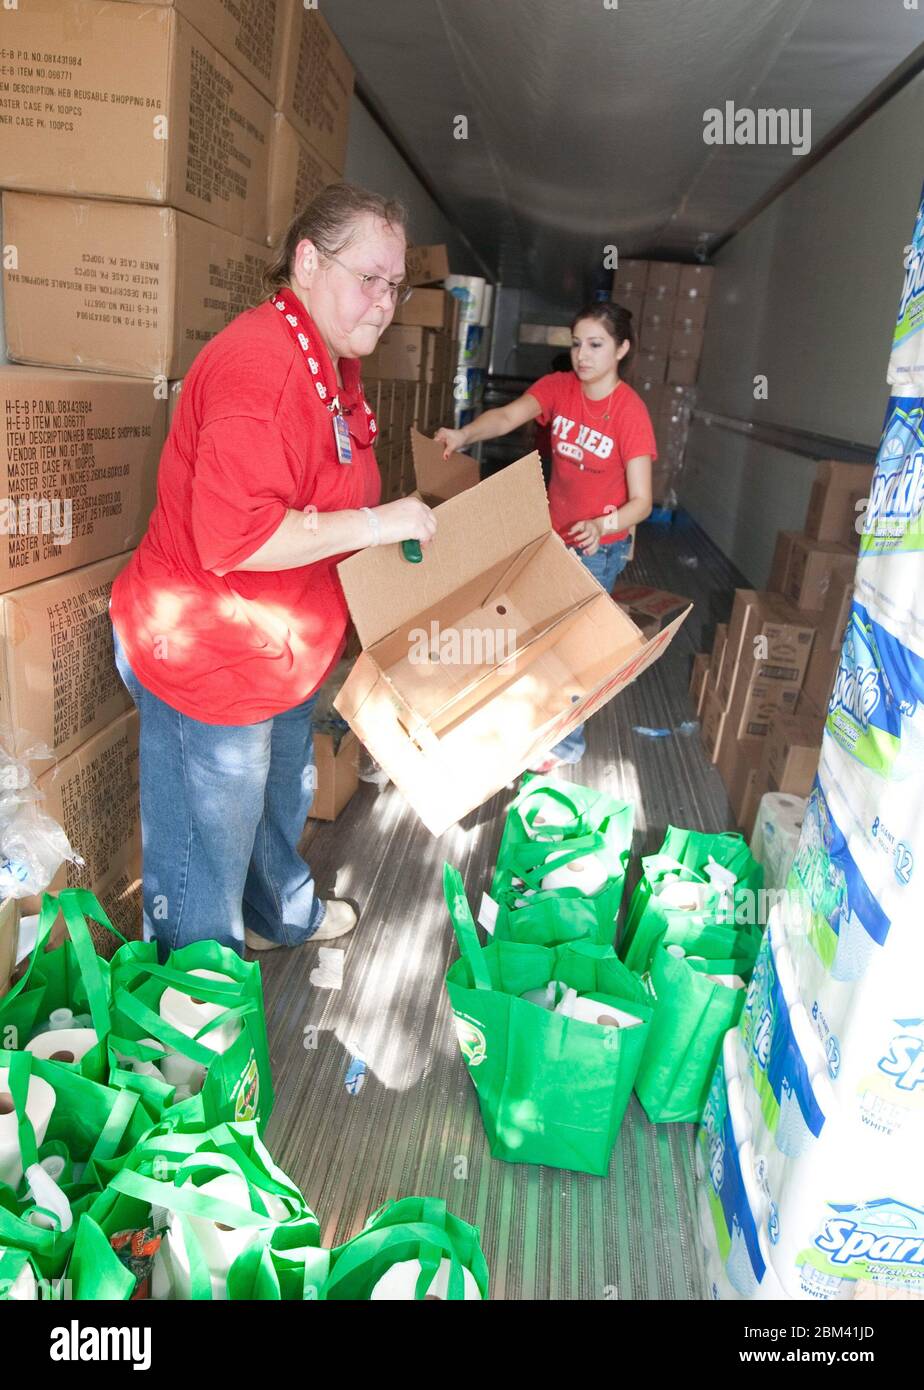 Bastrop Texas USA, September 13 2011: Volunteers from Texas supermarket chain H.E.B. give away bags of cleaning supplies for residents after massive wildfires swept through the area, burning more than 1400 homes.  ©Marjorie Kamys Cotera/Daemmrich Photography Stock Photo